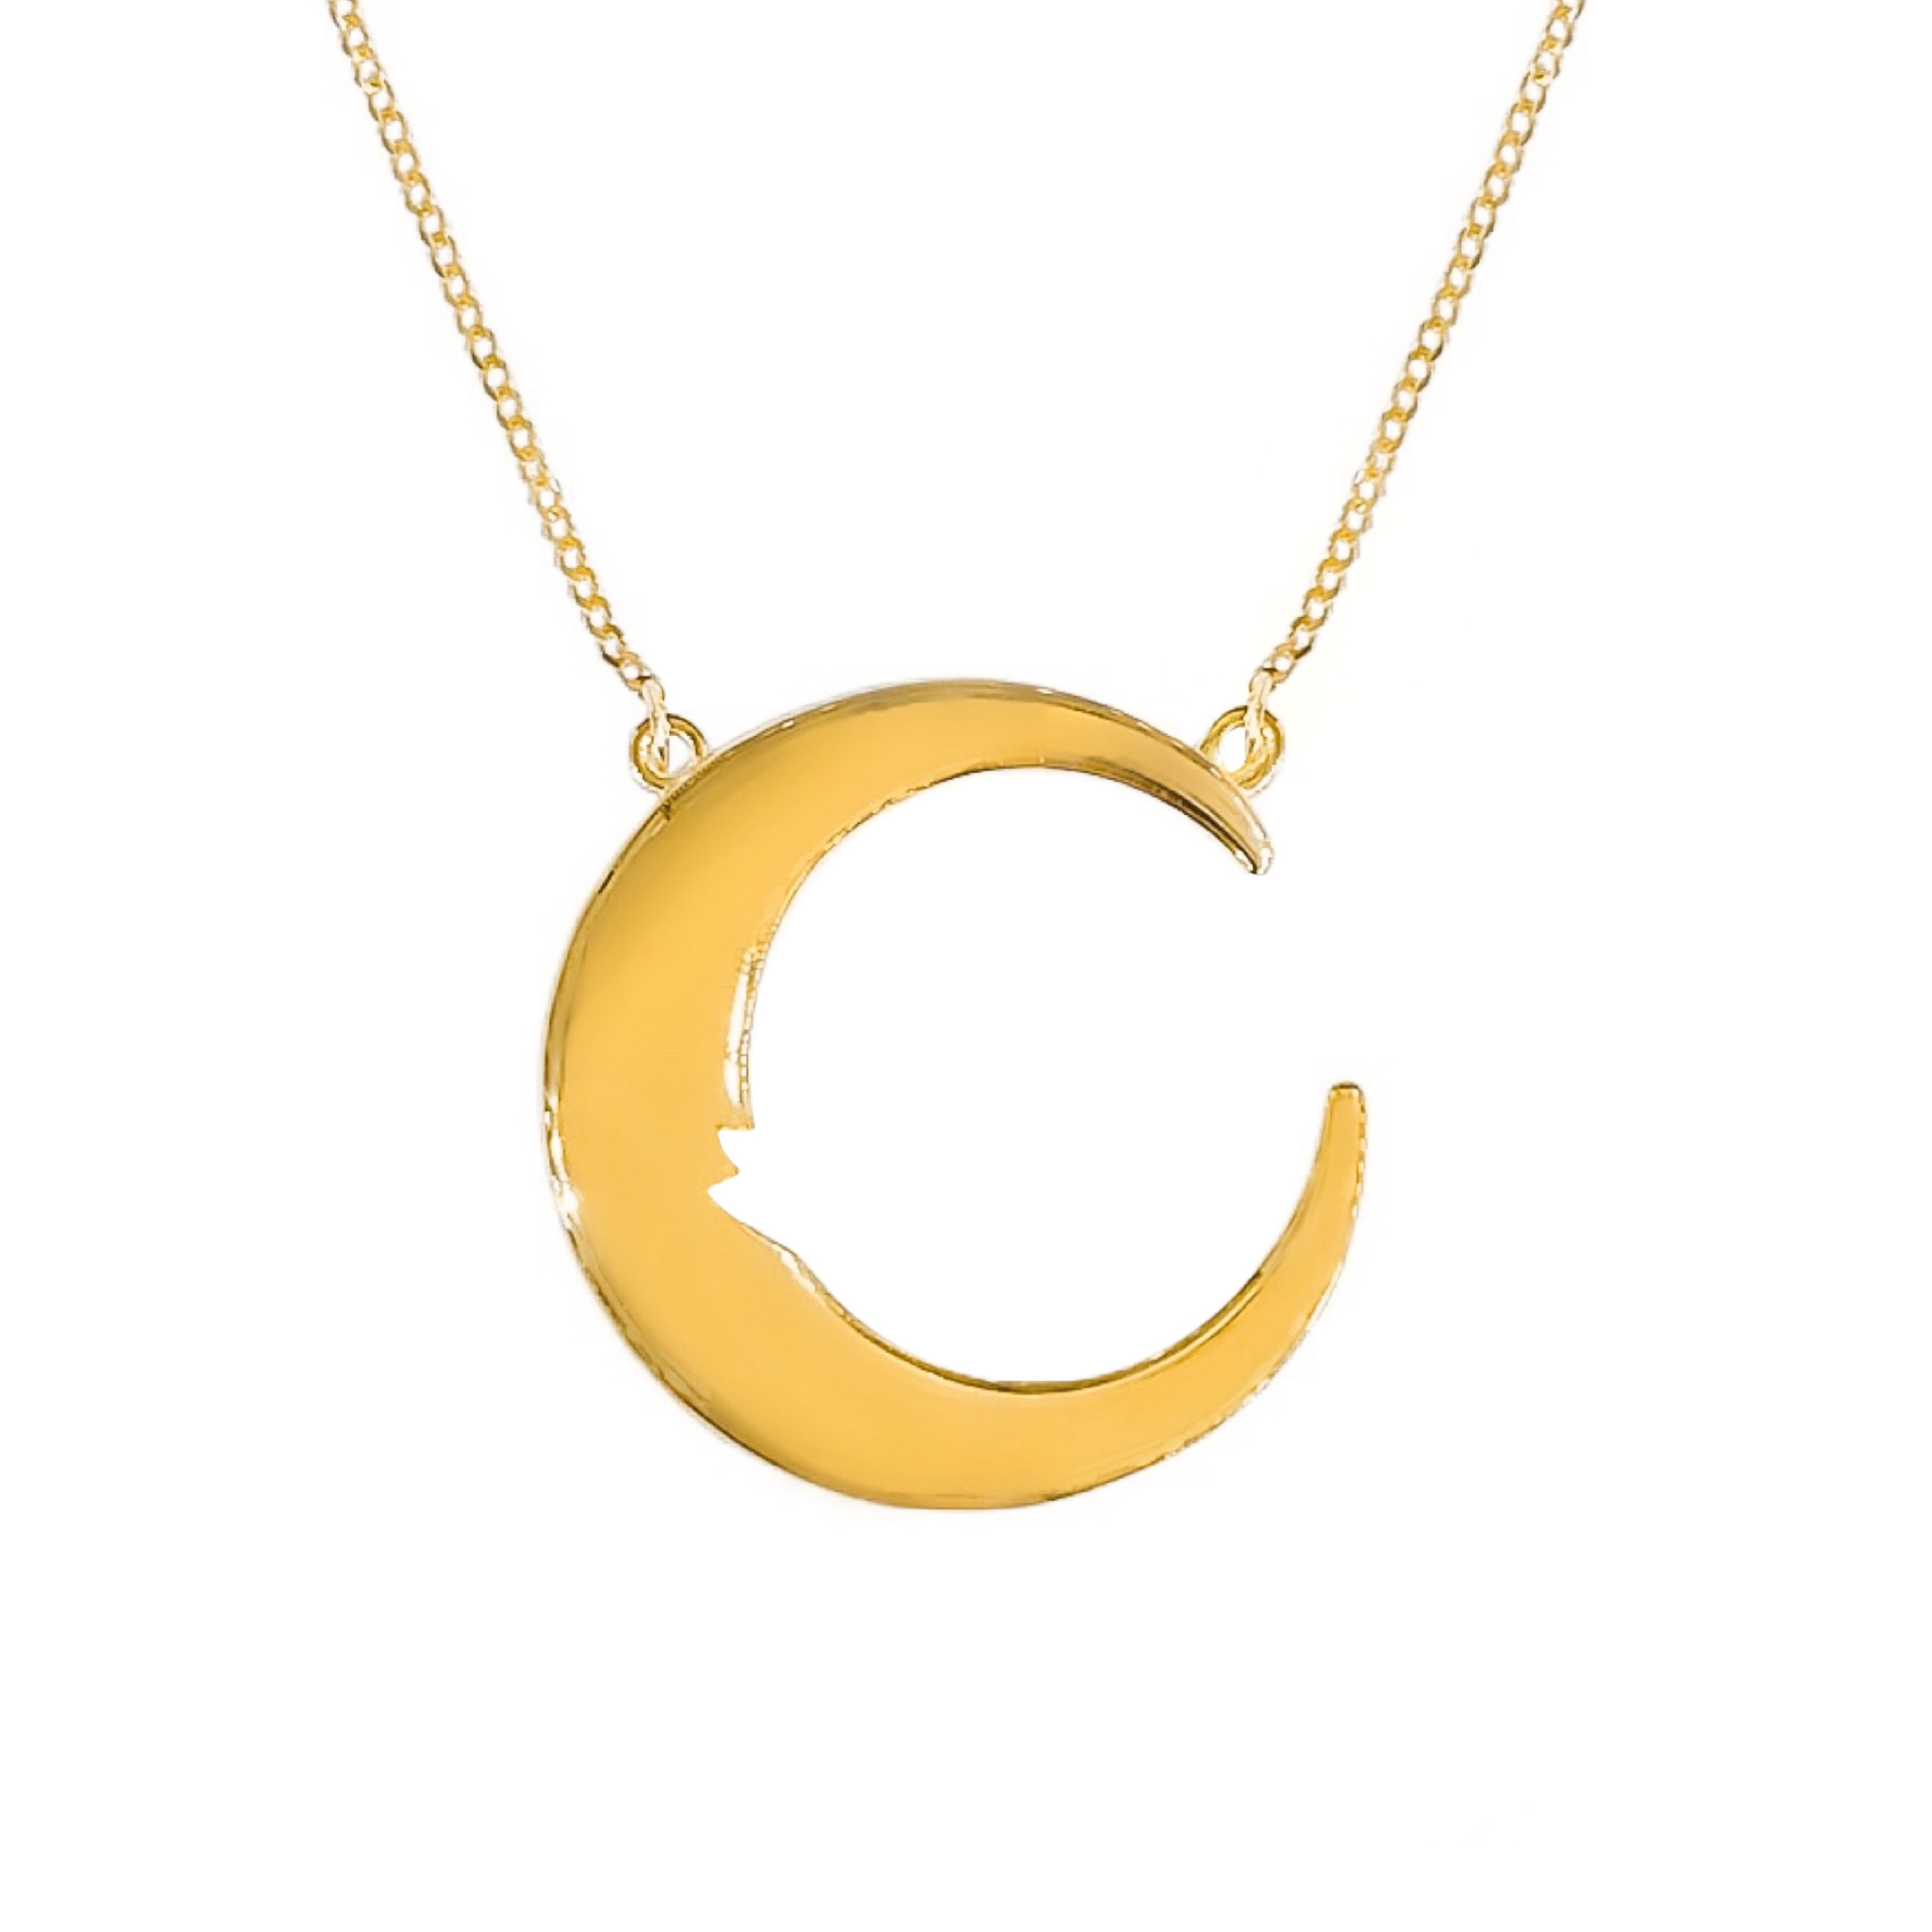 14K YELLOW GOLD SILHOUETTE CRESCENT MOON NECKLACE